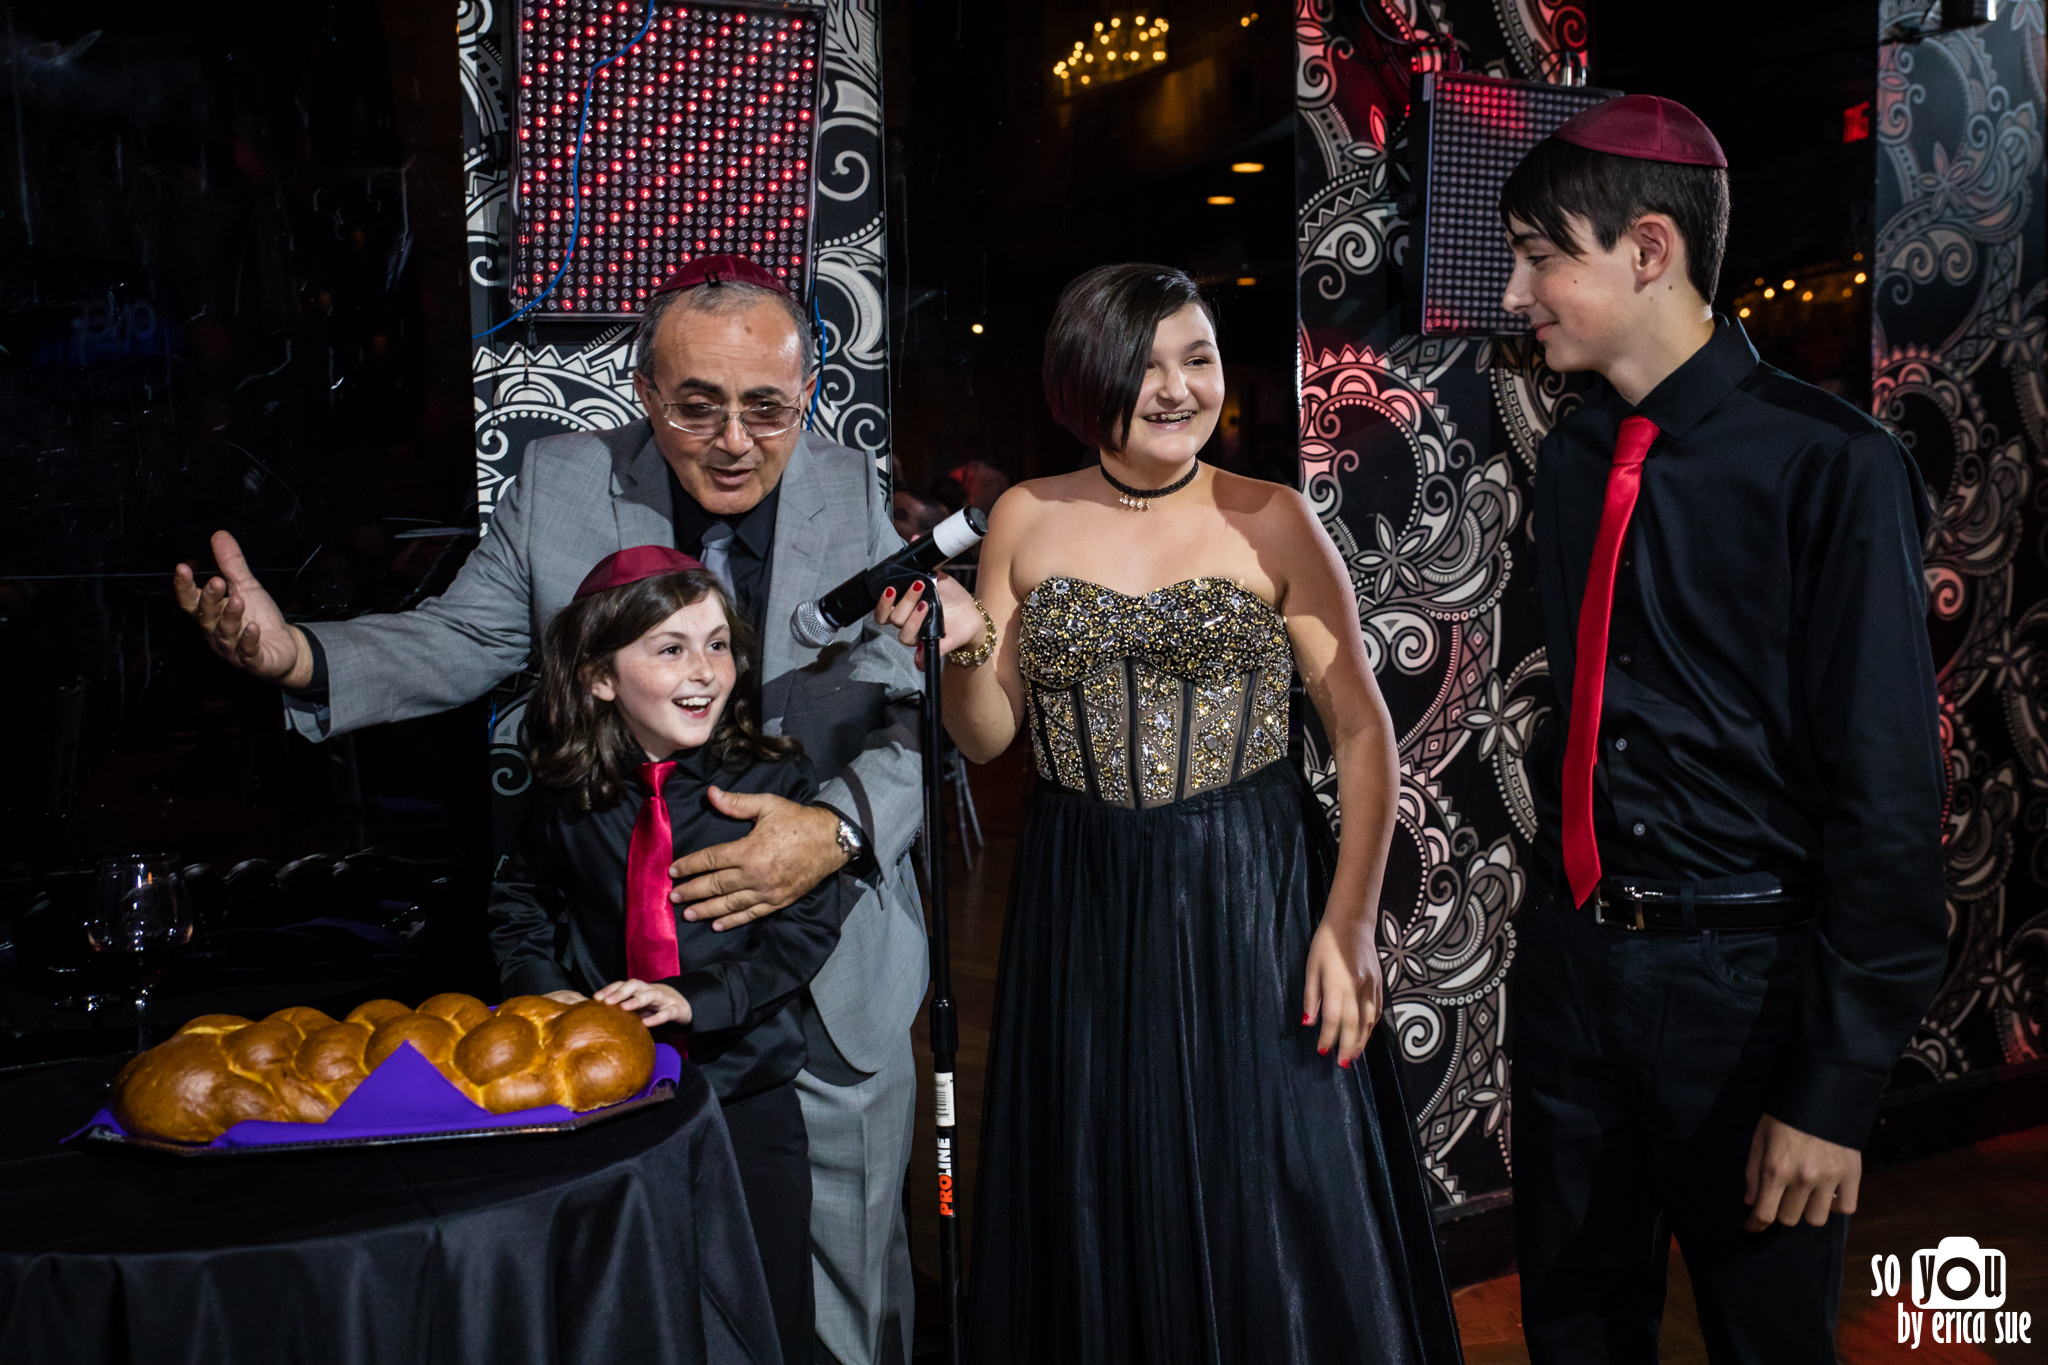 bat-mitzvah-photography-so-you-by-erica-sue-venue-ft-lauderdale--2.jpg